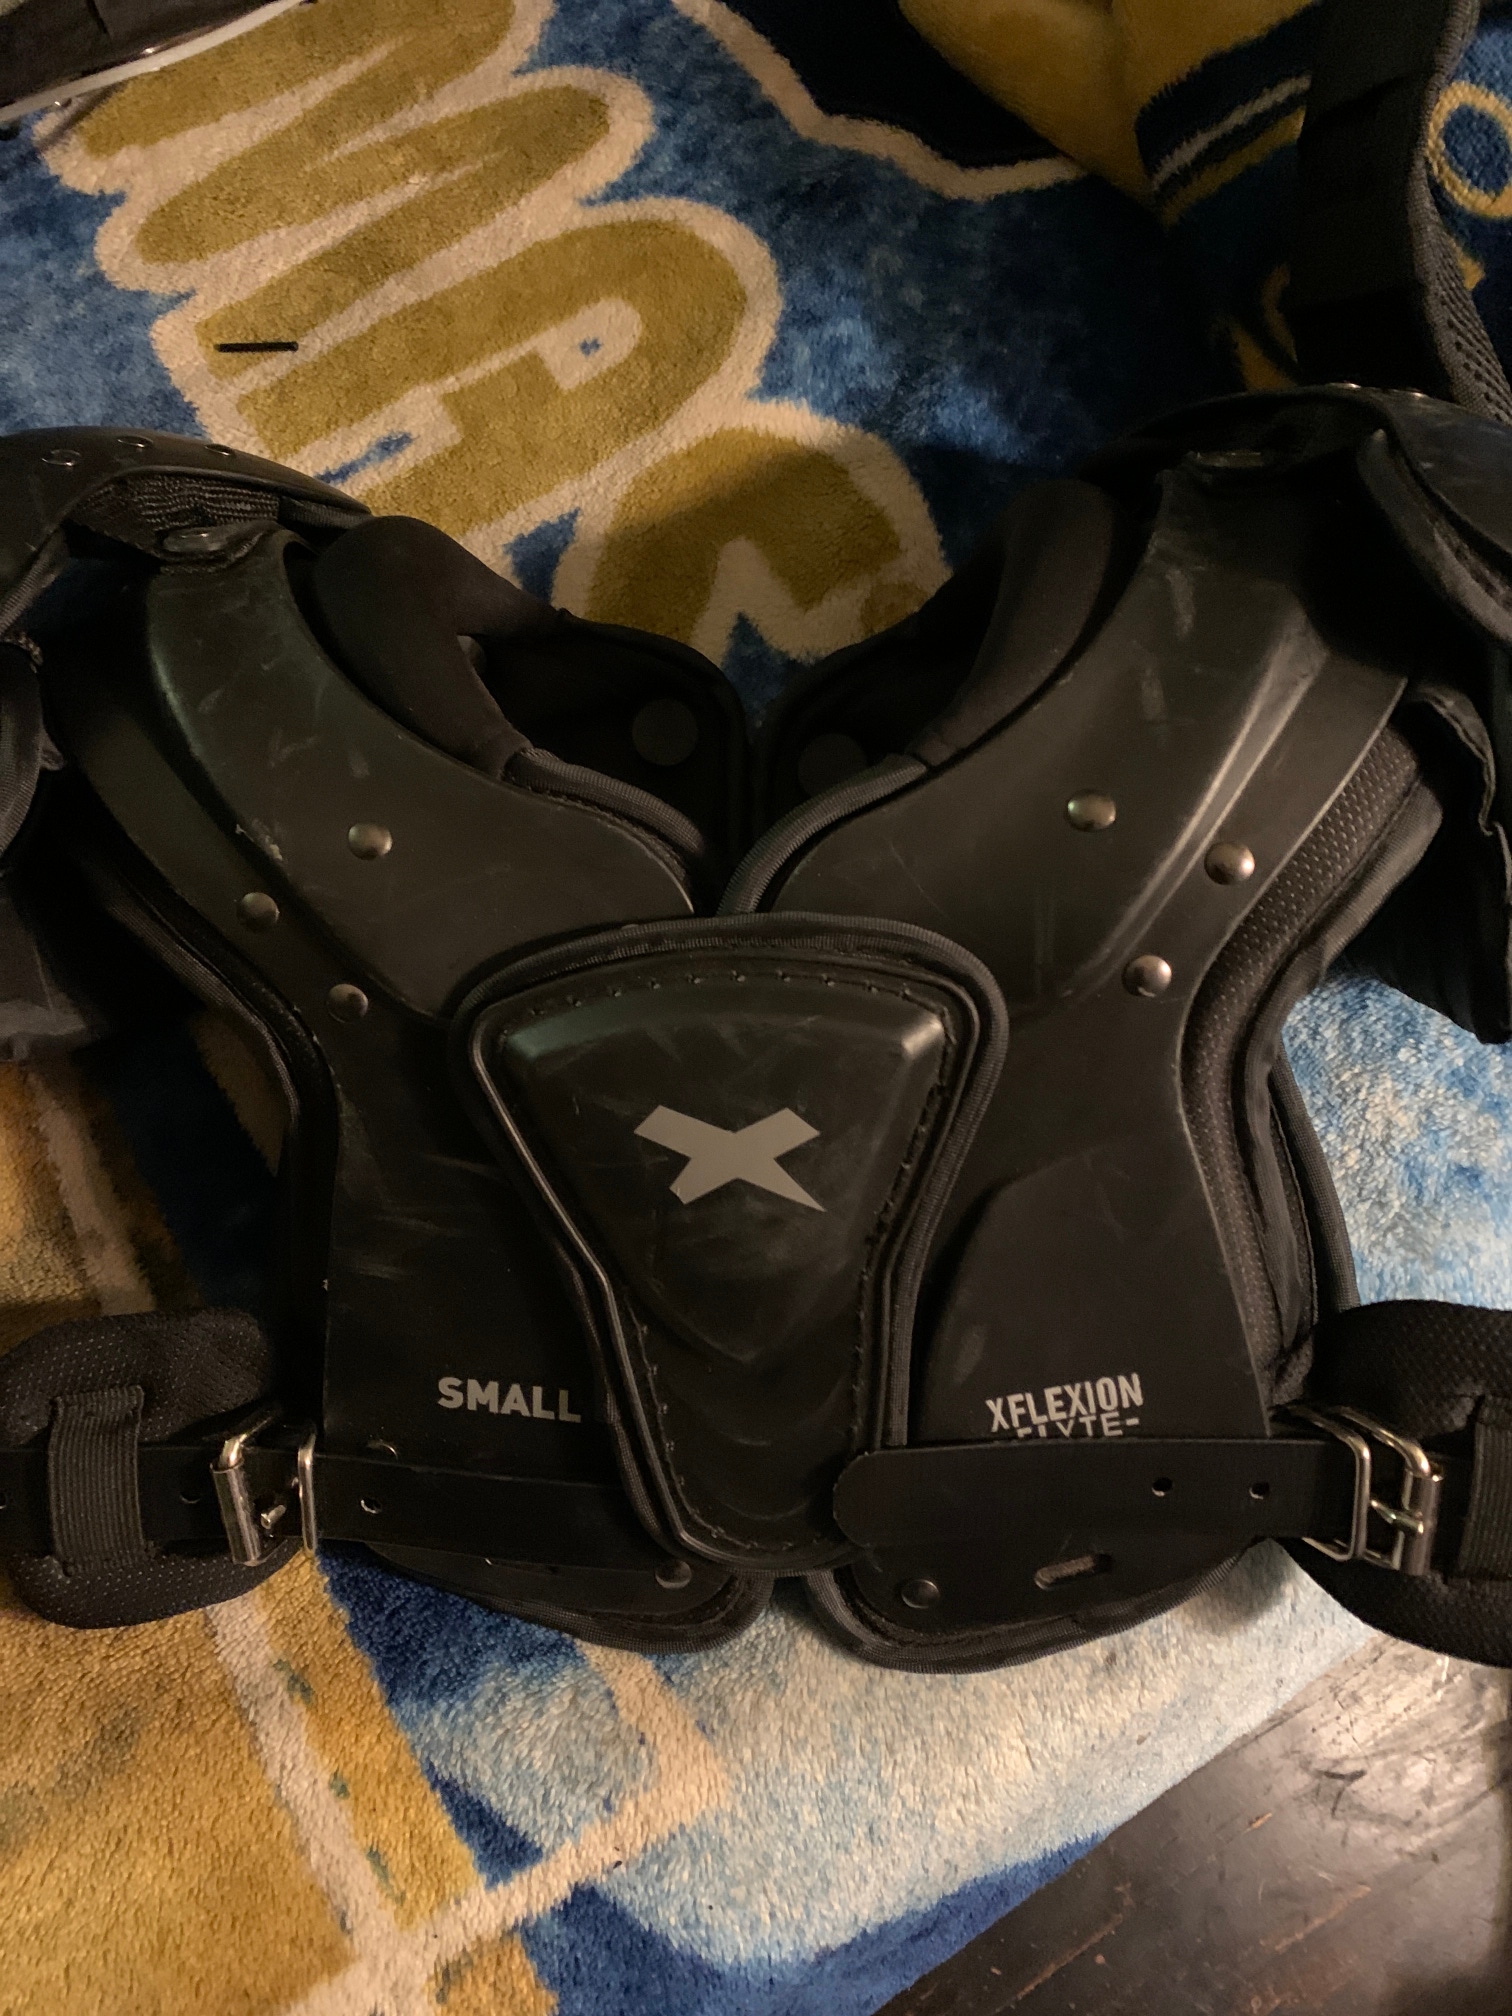 Used Small Xenith Flyte Shoulder Pads